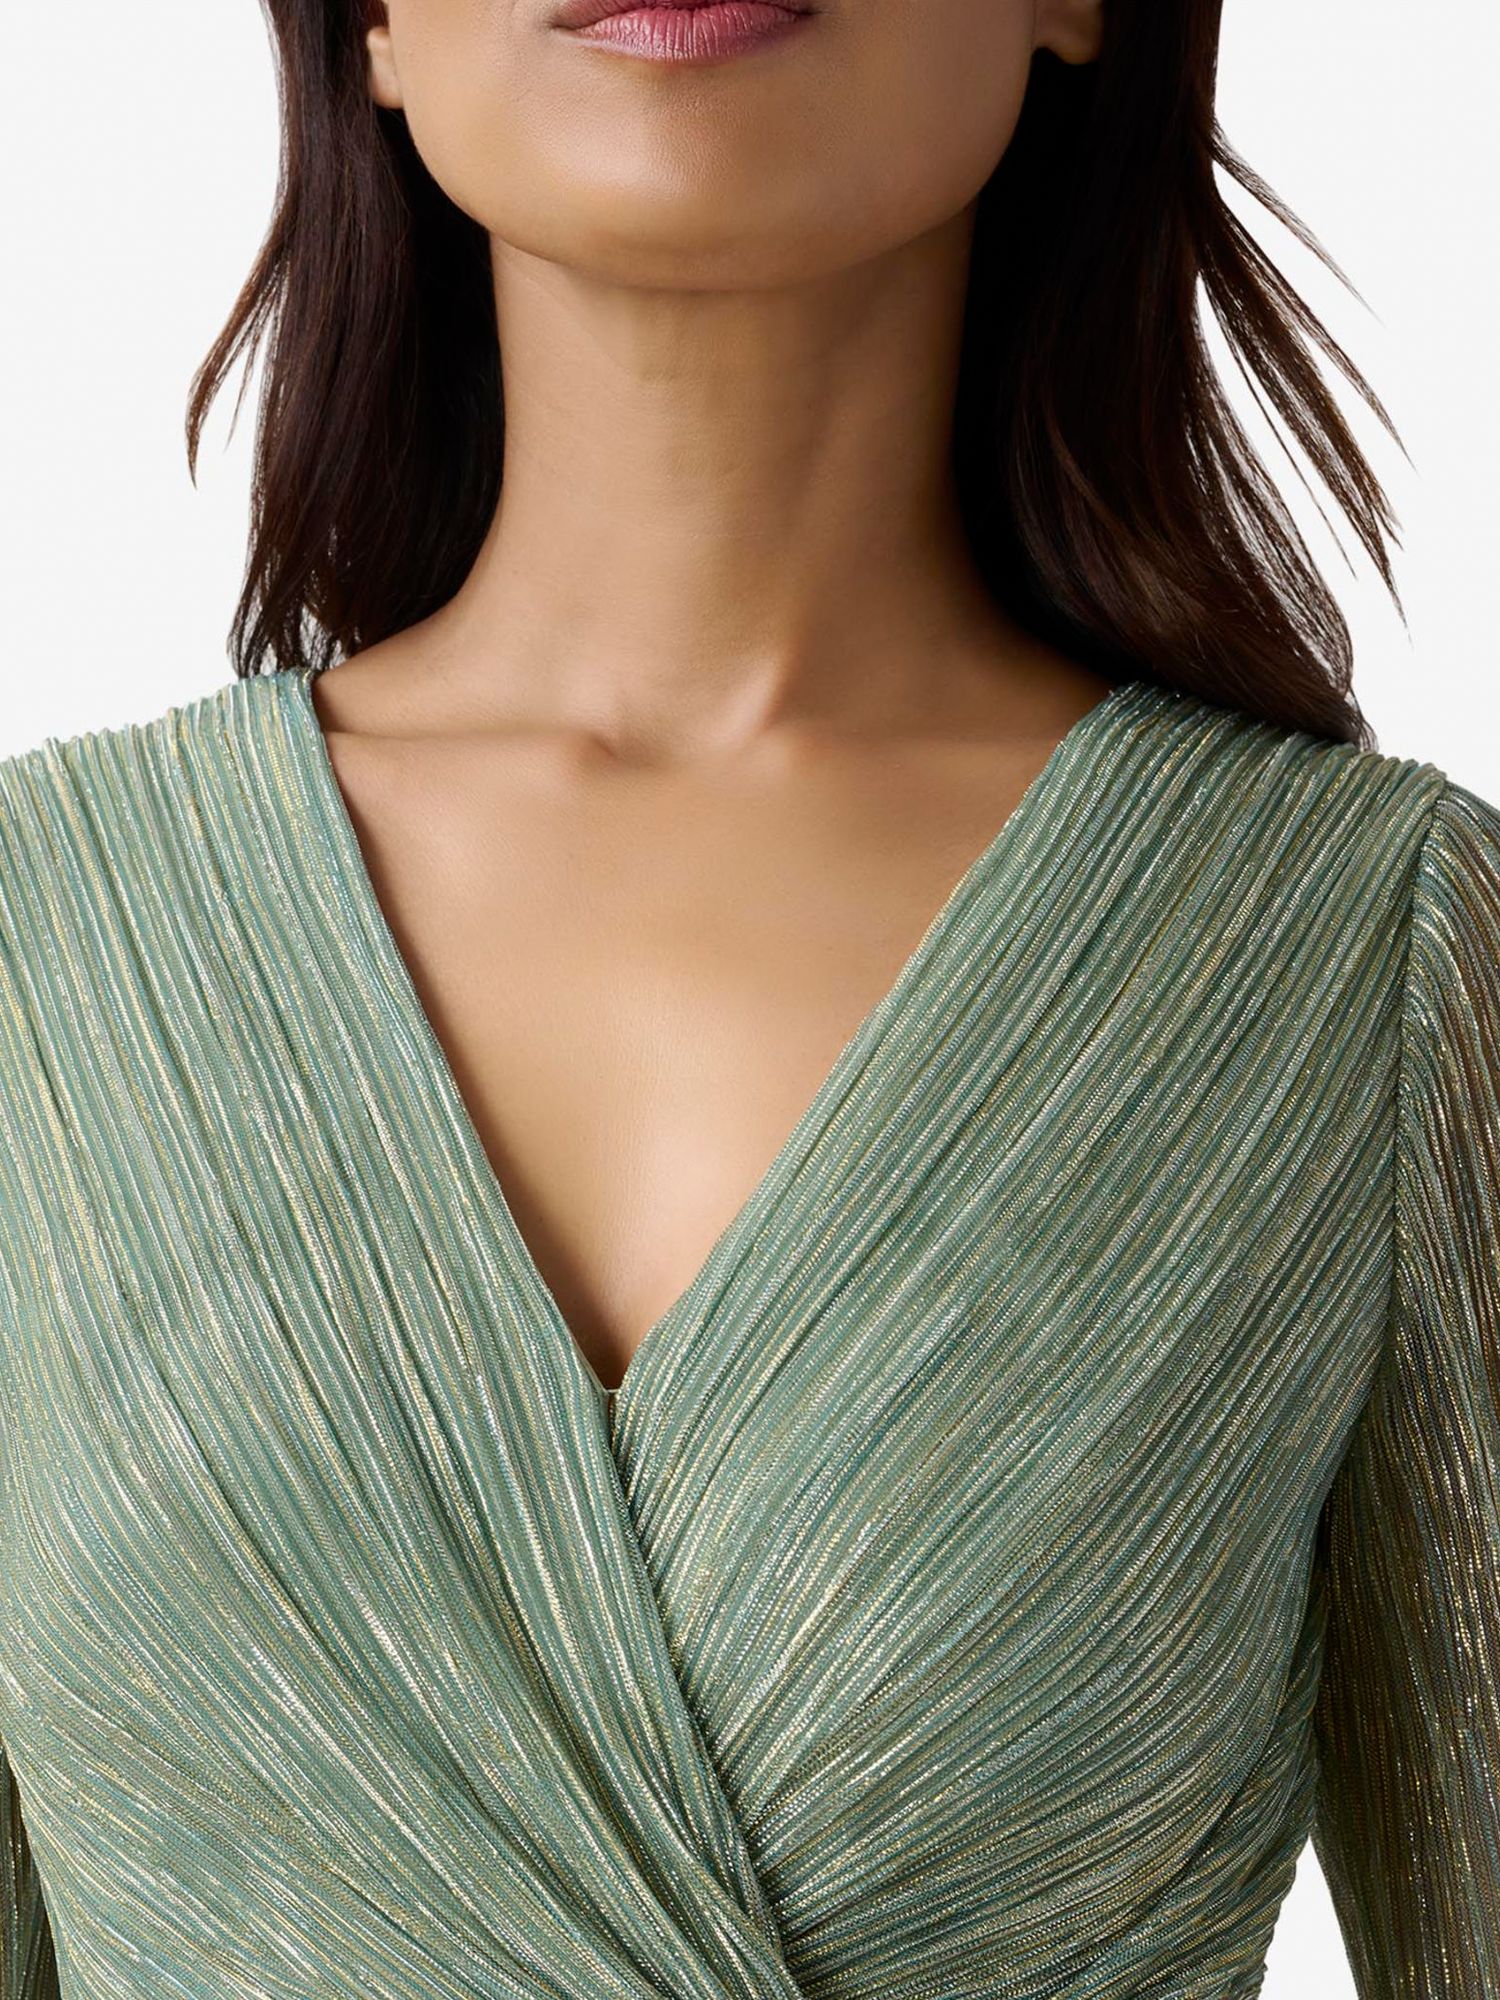 Buy Adrianna Papell Metallic Mesh Draped Gown, Green Slate Online at johnlewis.com